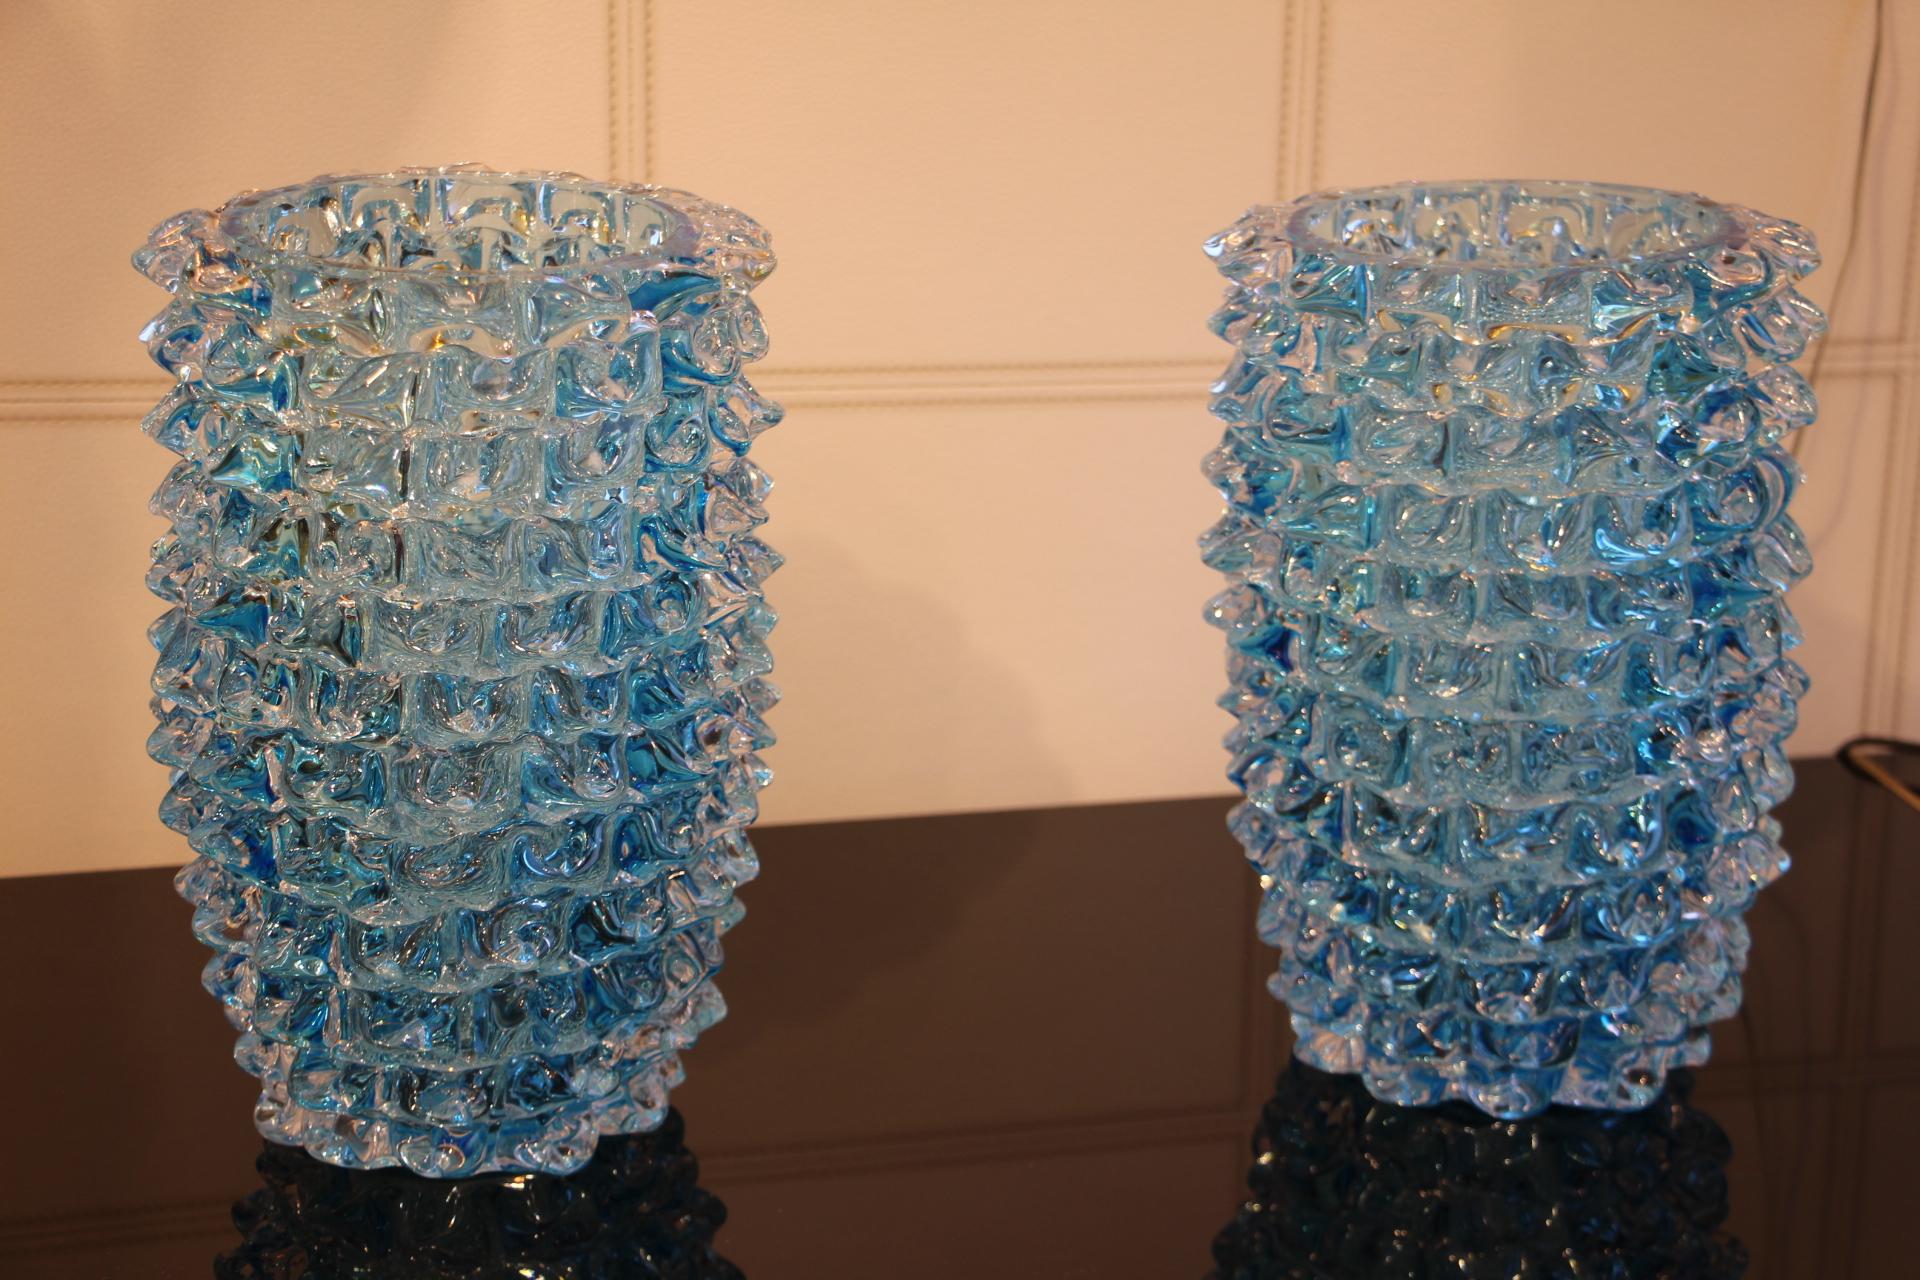 A spectacular pair of Venetian vases, imposing size in clear and turquoise blue blown Murano glass, hand decorated with the technique rostrato: spikes of glass individually pulled in relief.
Thick walled casing glass produces a lot of iridescent